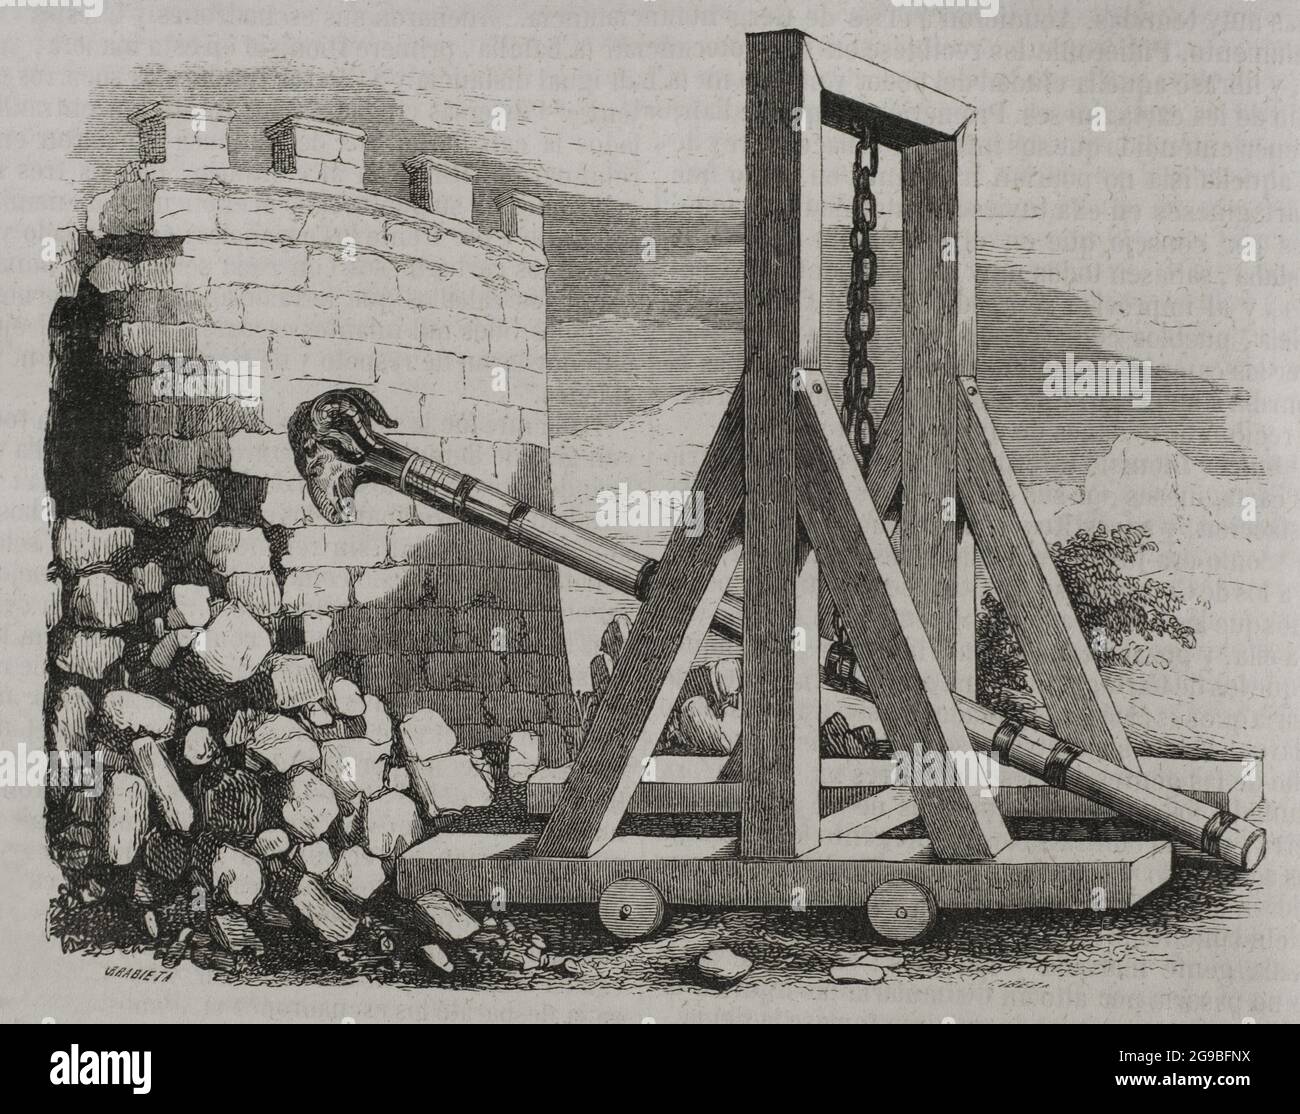 Ancient history. Battering ram. Siege weapon used to break open the masonry walls of fortifications or splinter their wooden gates. Engraving. Historia General de España by Father Mariana. Madrid, 1852. Stock Photo